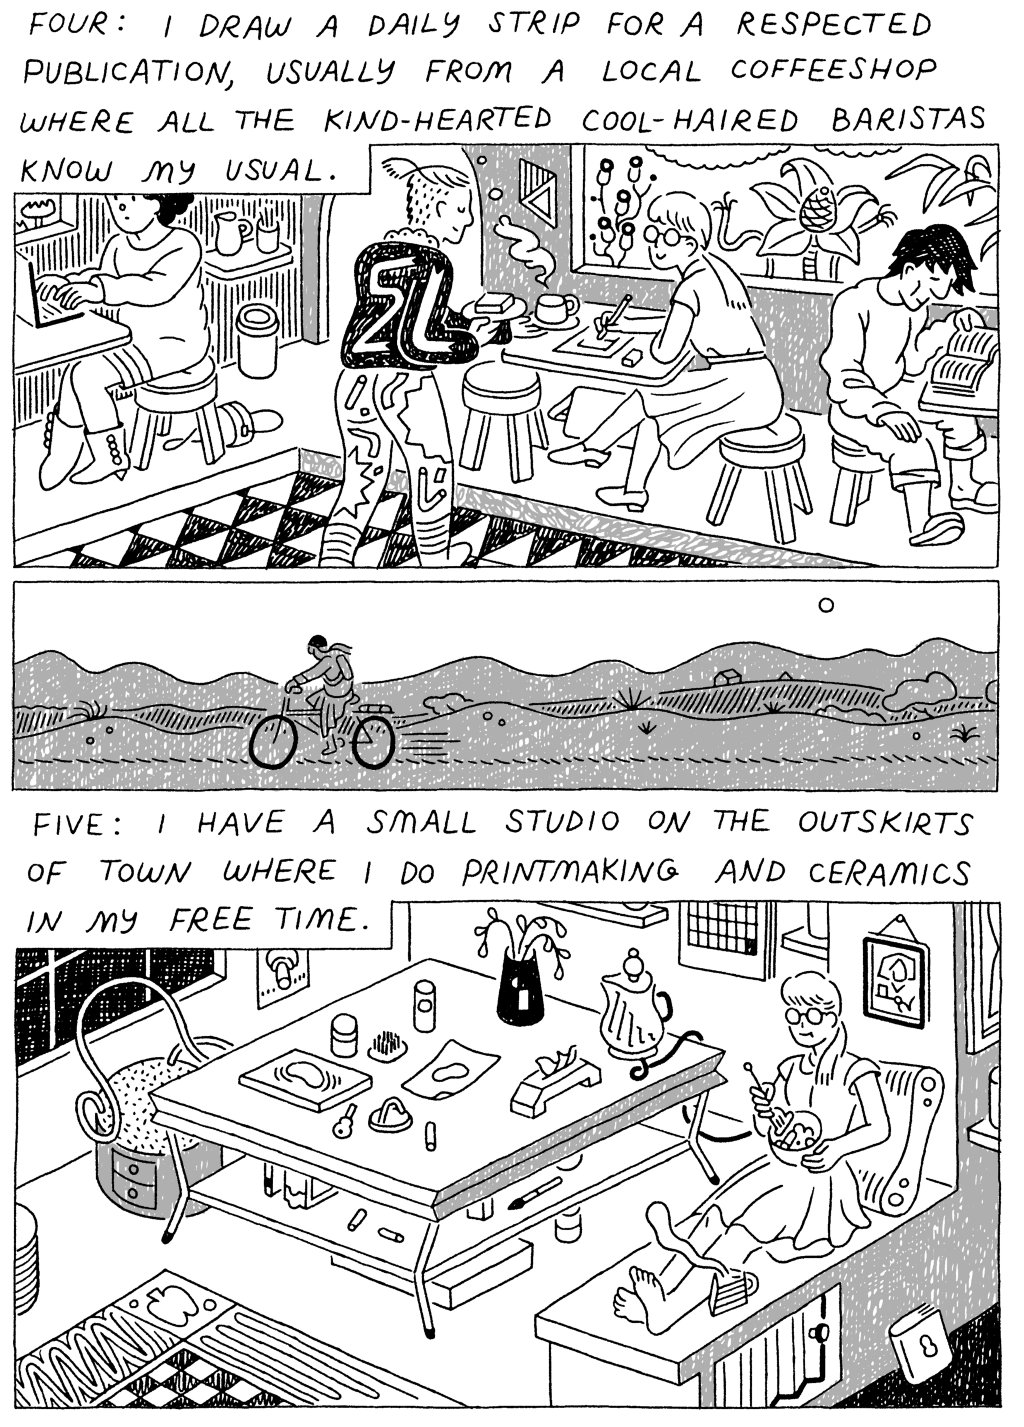 Panel 1: 
(Woman, drawing at a cafe. Barista approaching with a beverage and snack.) Four: I draw a daily strip for a respected publication, usually from a local coffeeshop where all the kind-hearted, cool-haired baristas know my usual. 

Panel 3: 
(Woman, making ceramics by a large craft table.) Five: I have a small studio on the outskirts of town where I do printmaking and ceramics in my free time. 